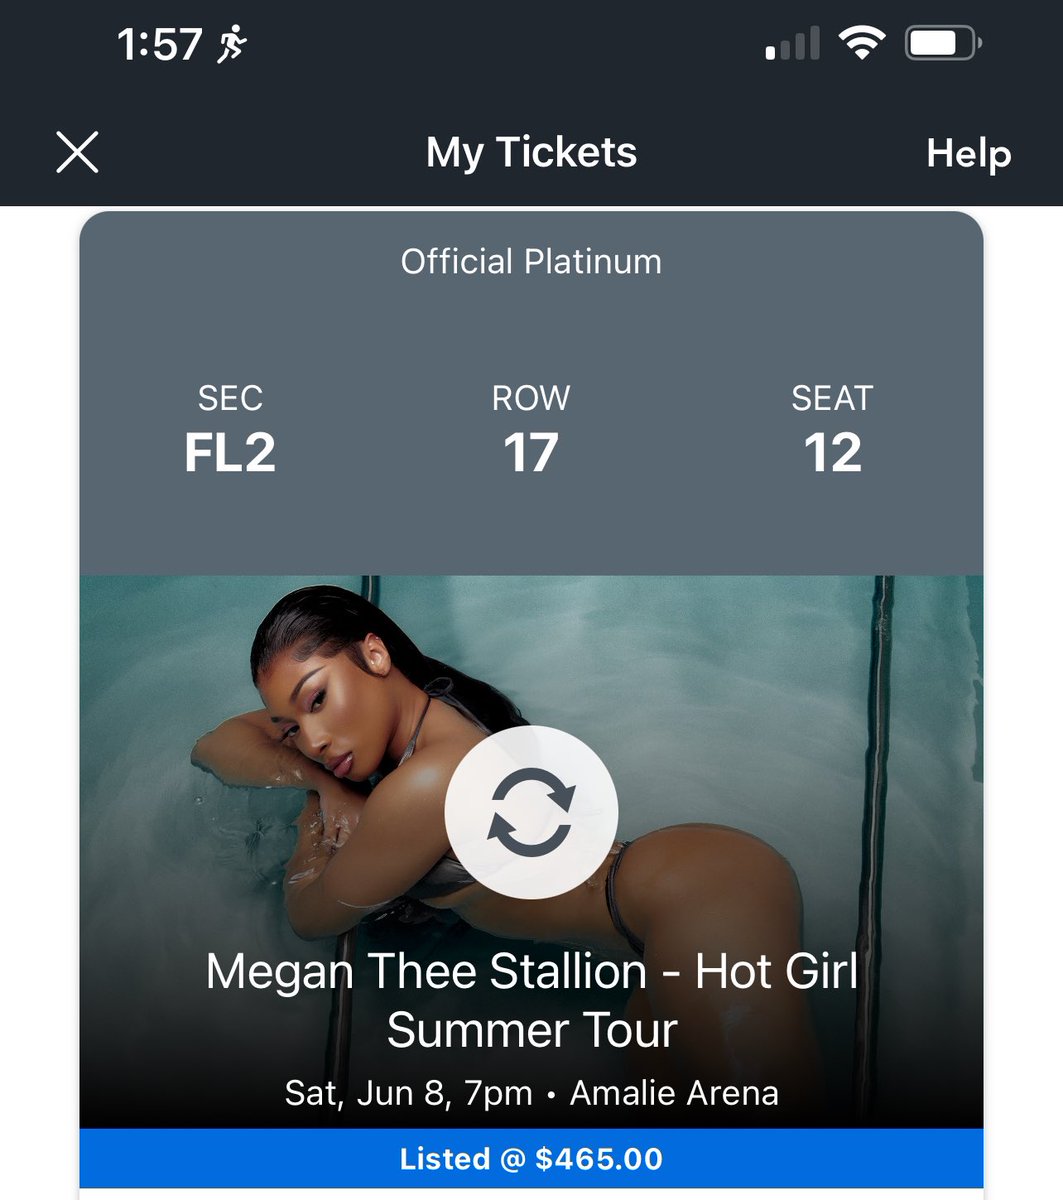 Selling ONE Megan Thee Stallion Hot Girl Summer Tickets for $400 (FACE VALUE) in Tampa Florida Amalie Arena. Great seats & have proof of tickets. Selling because I have better seats hit me up!! #hotgirlsummertour #ticketmaster #floorseats #tampa #amaliearena #MeganTheeStallion